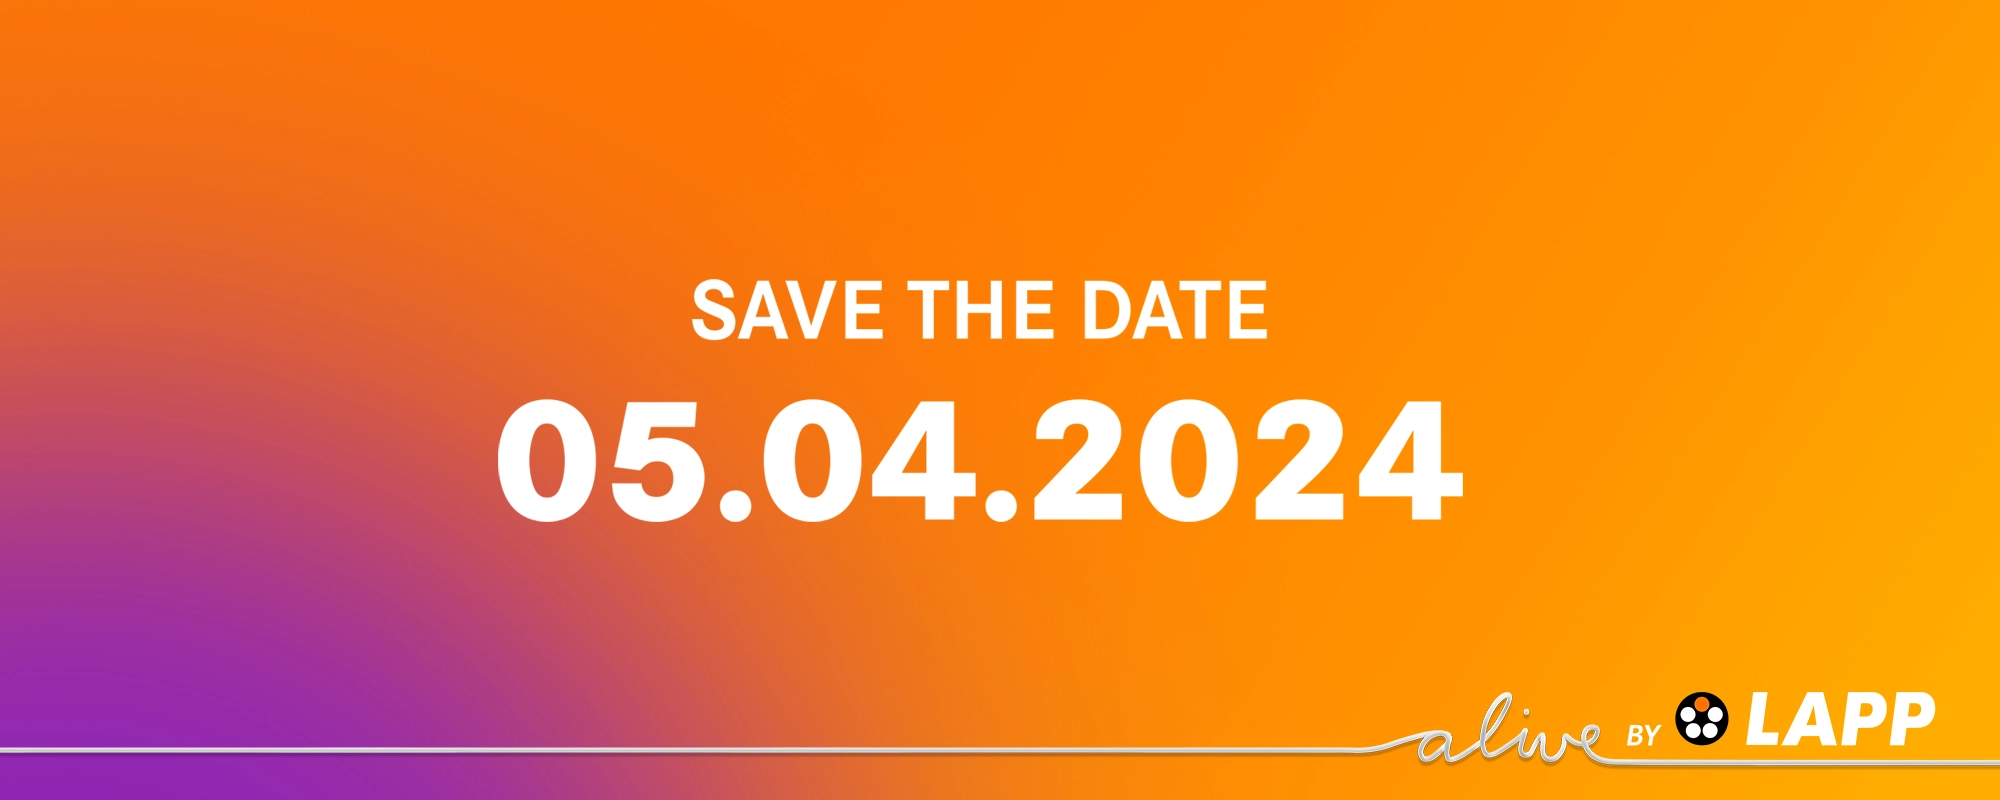 save the date web